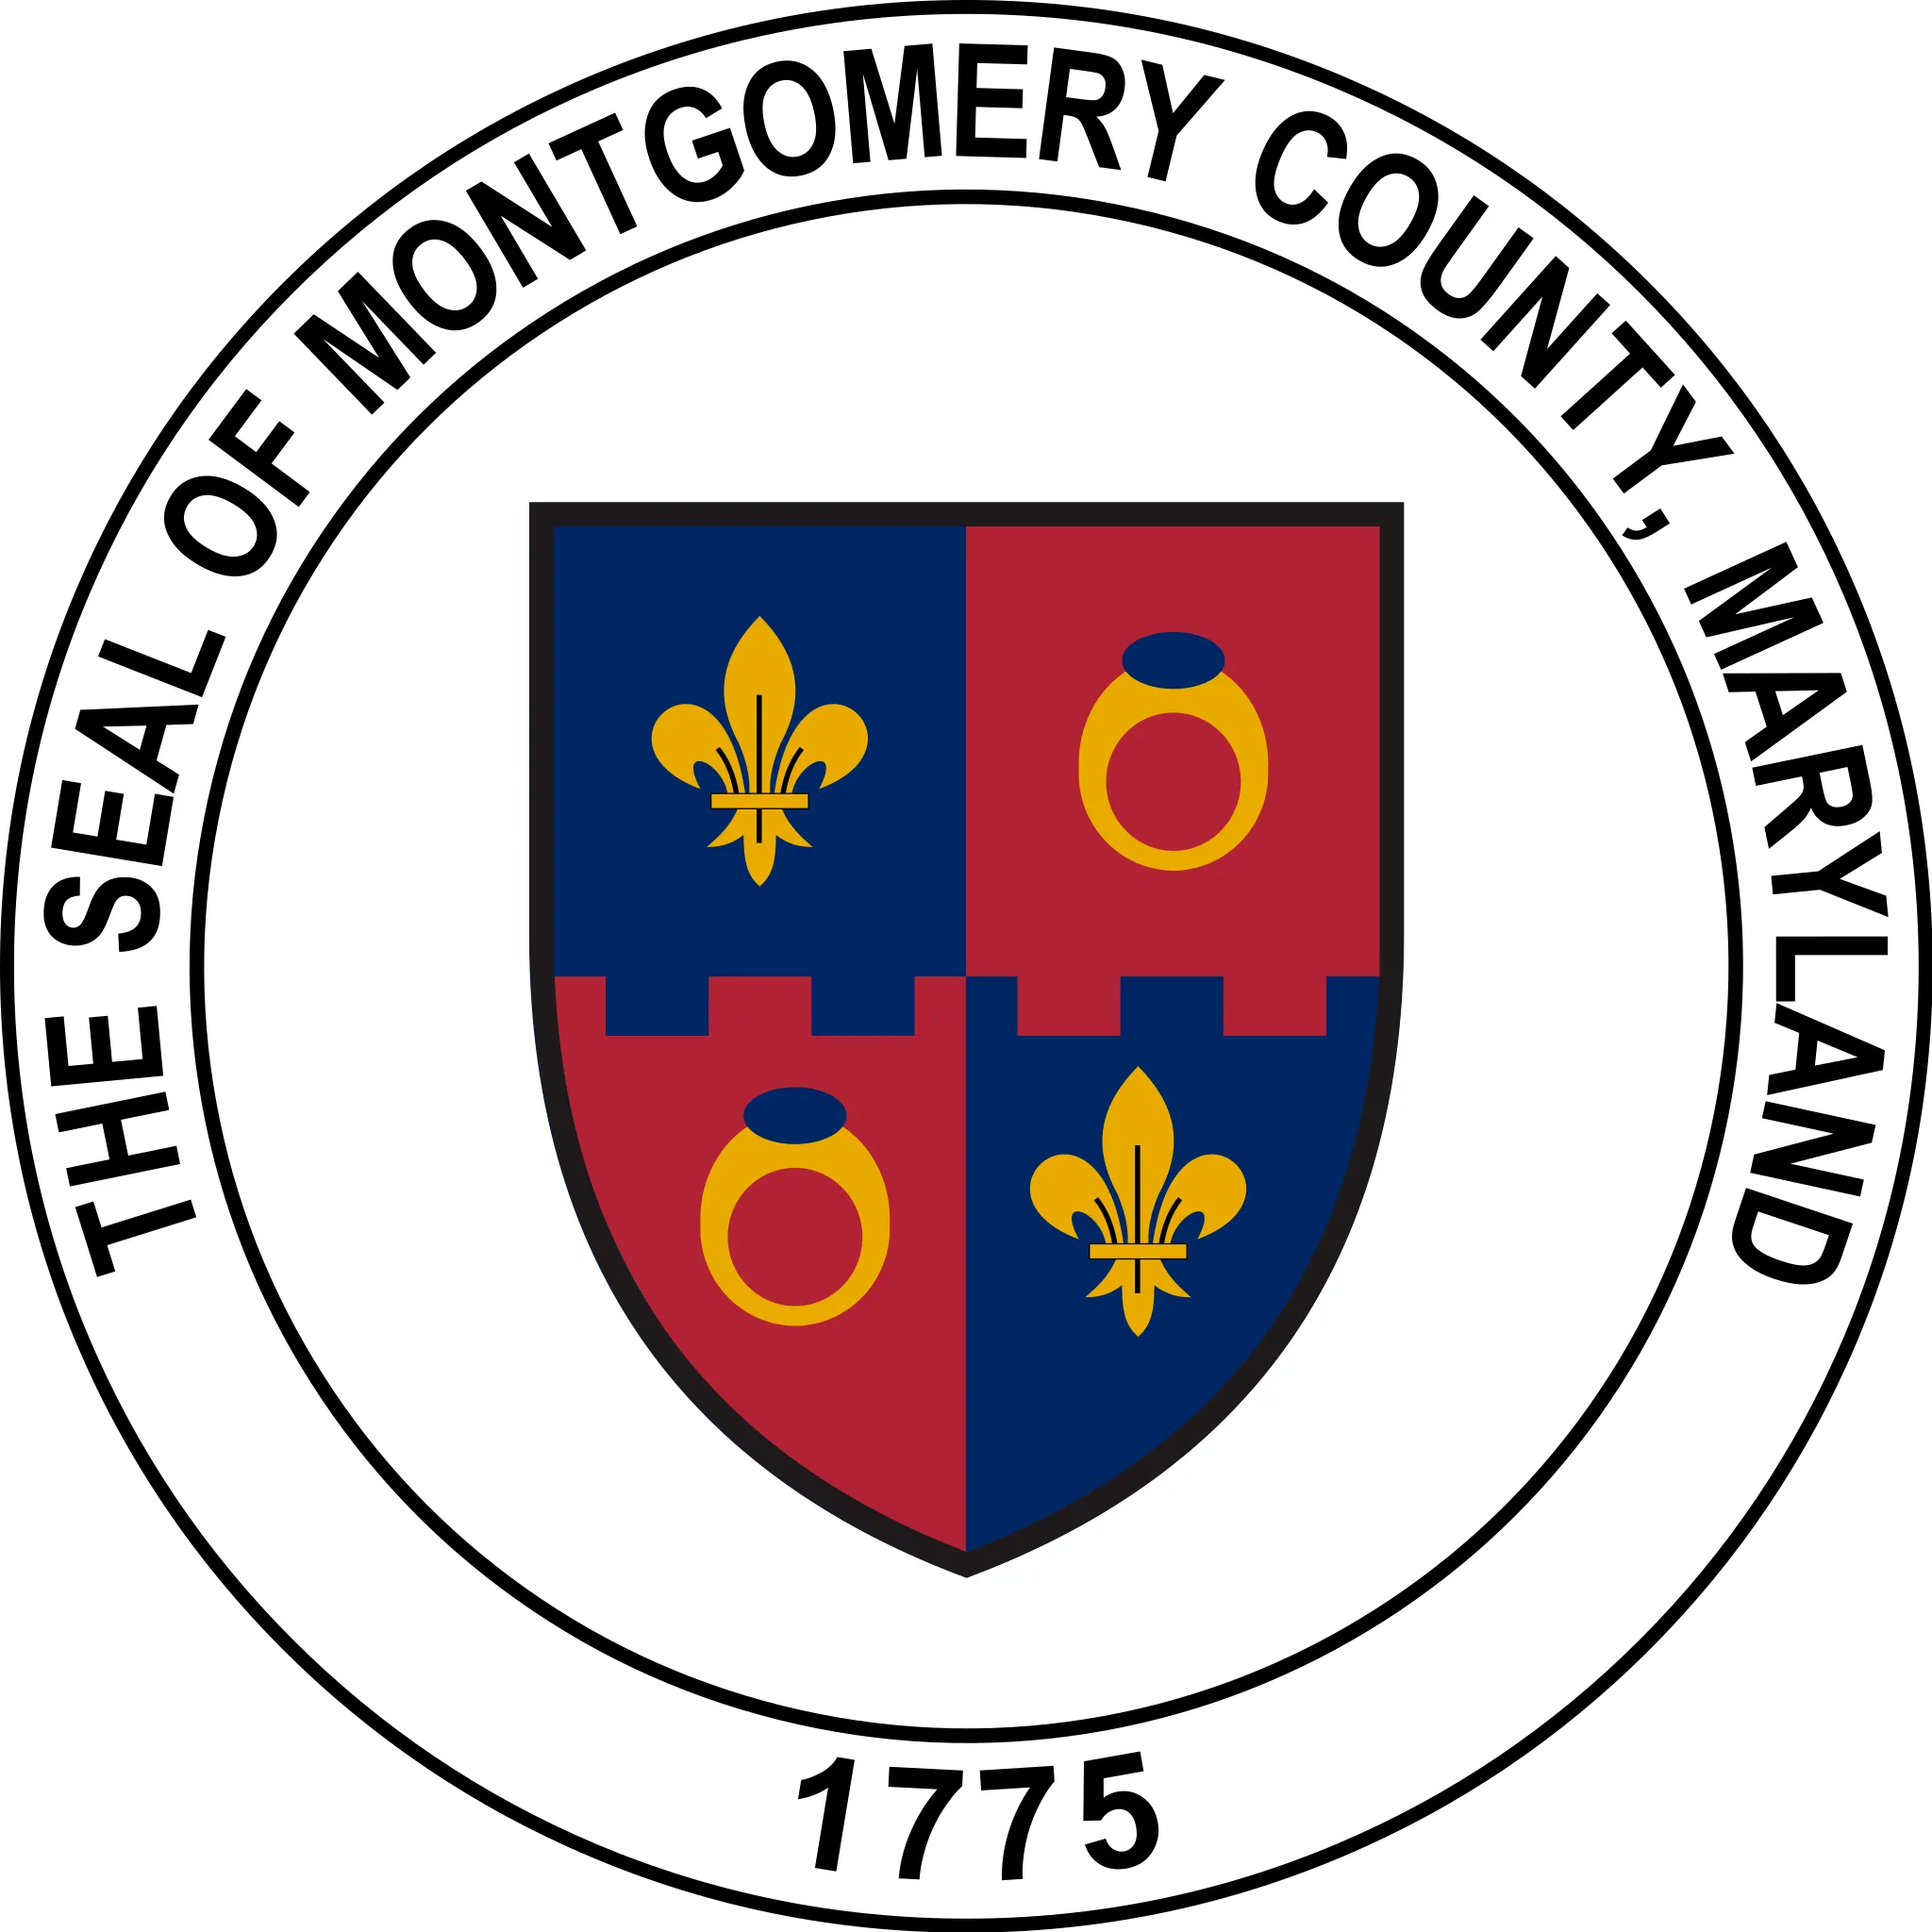 The Seal of Montgomery County